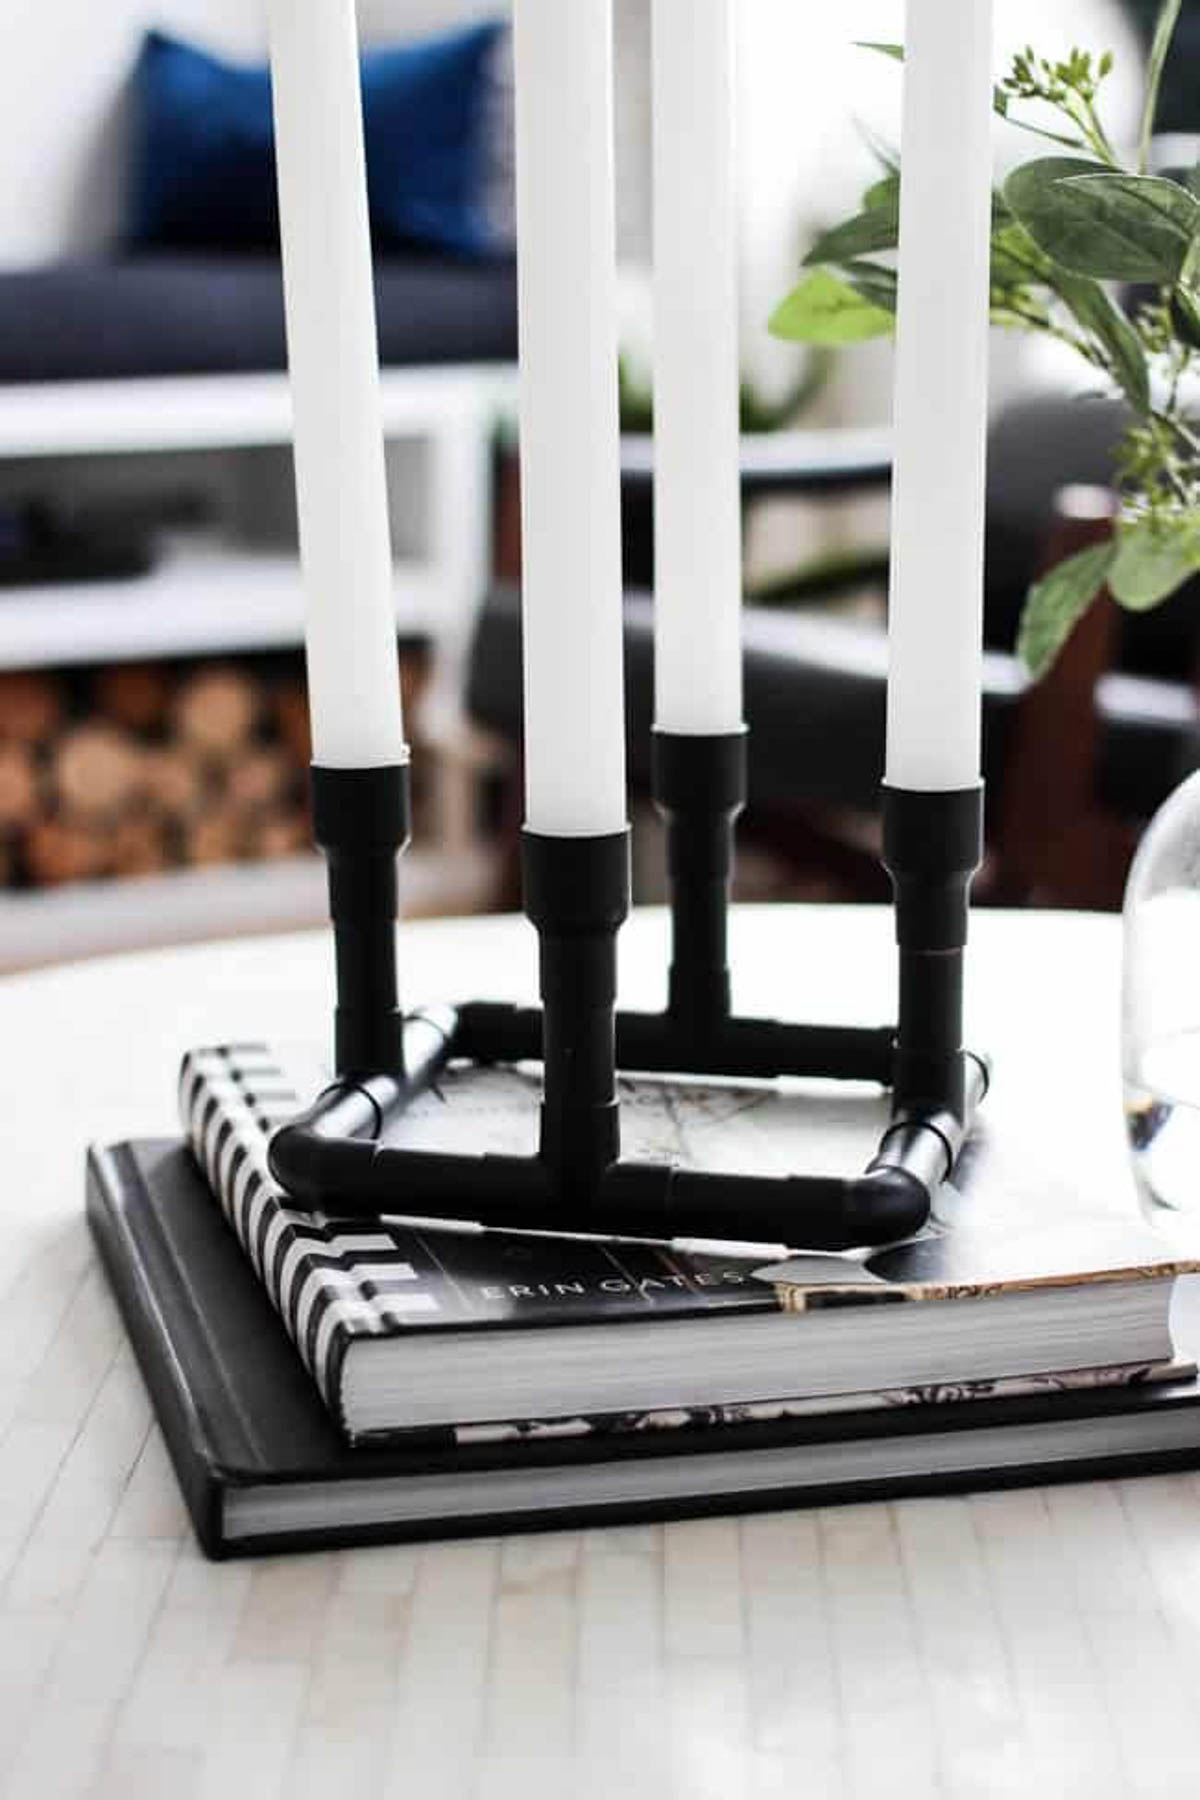 Completed DIY modern candle holder on top of books.